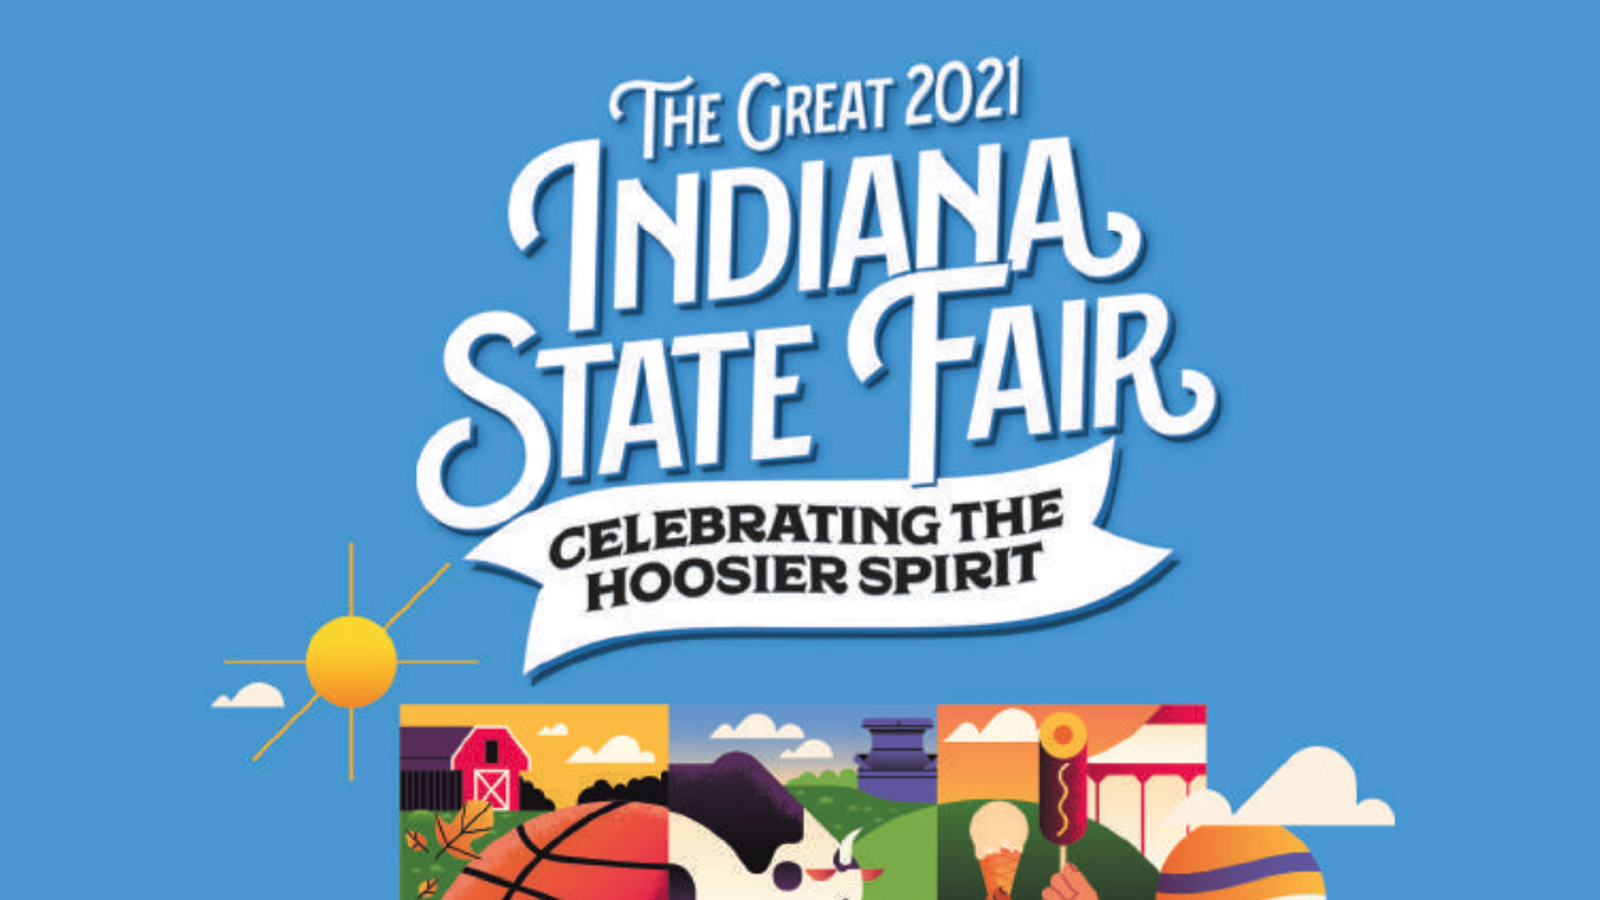 10 NEW Things Added to Your 2021 Indiana State Fair WTCA